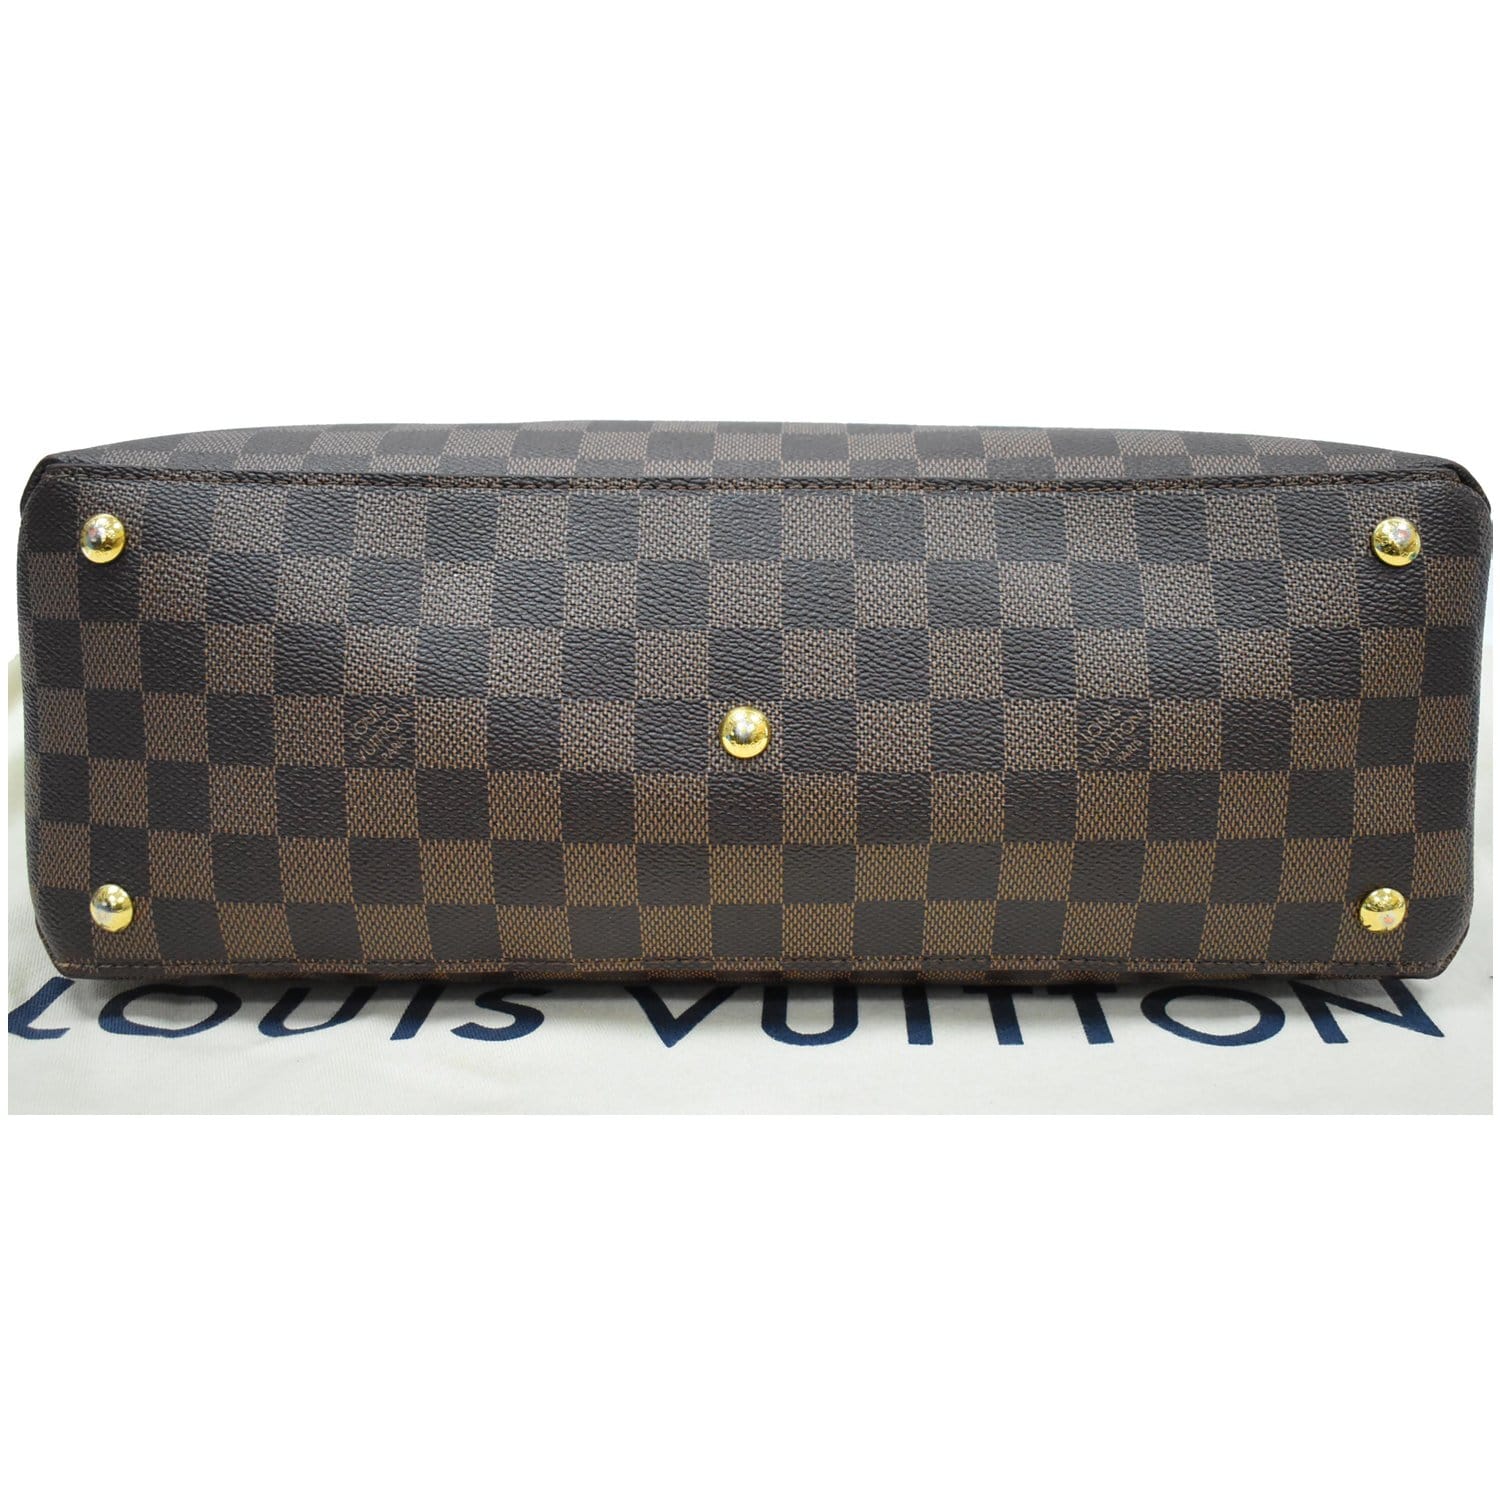 Lv riverside leather handbag Louis Vuitton Brown in Leather - 38847406